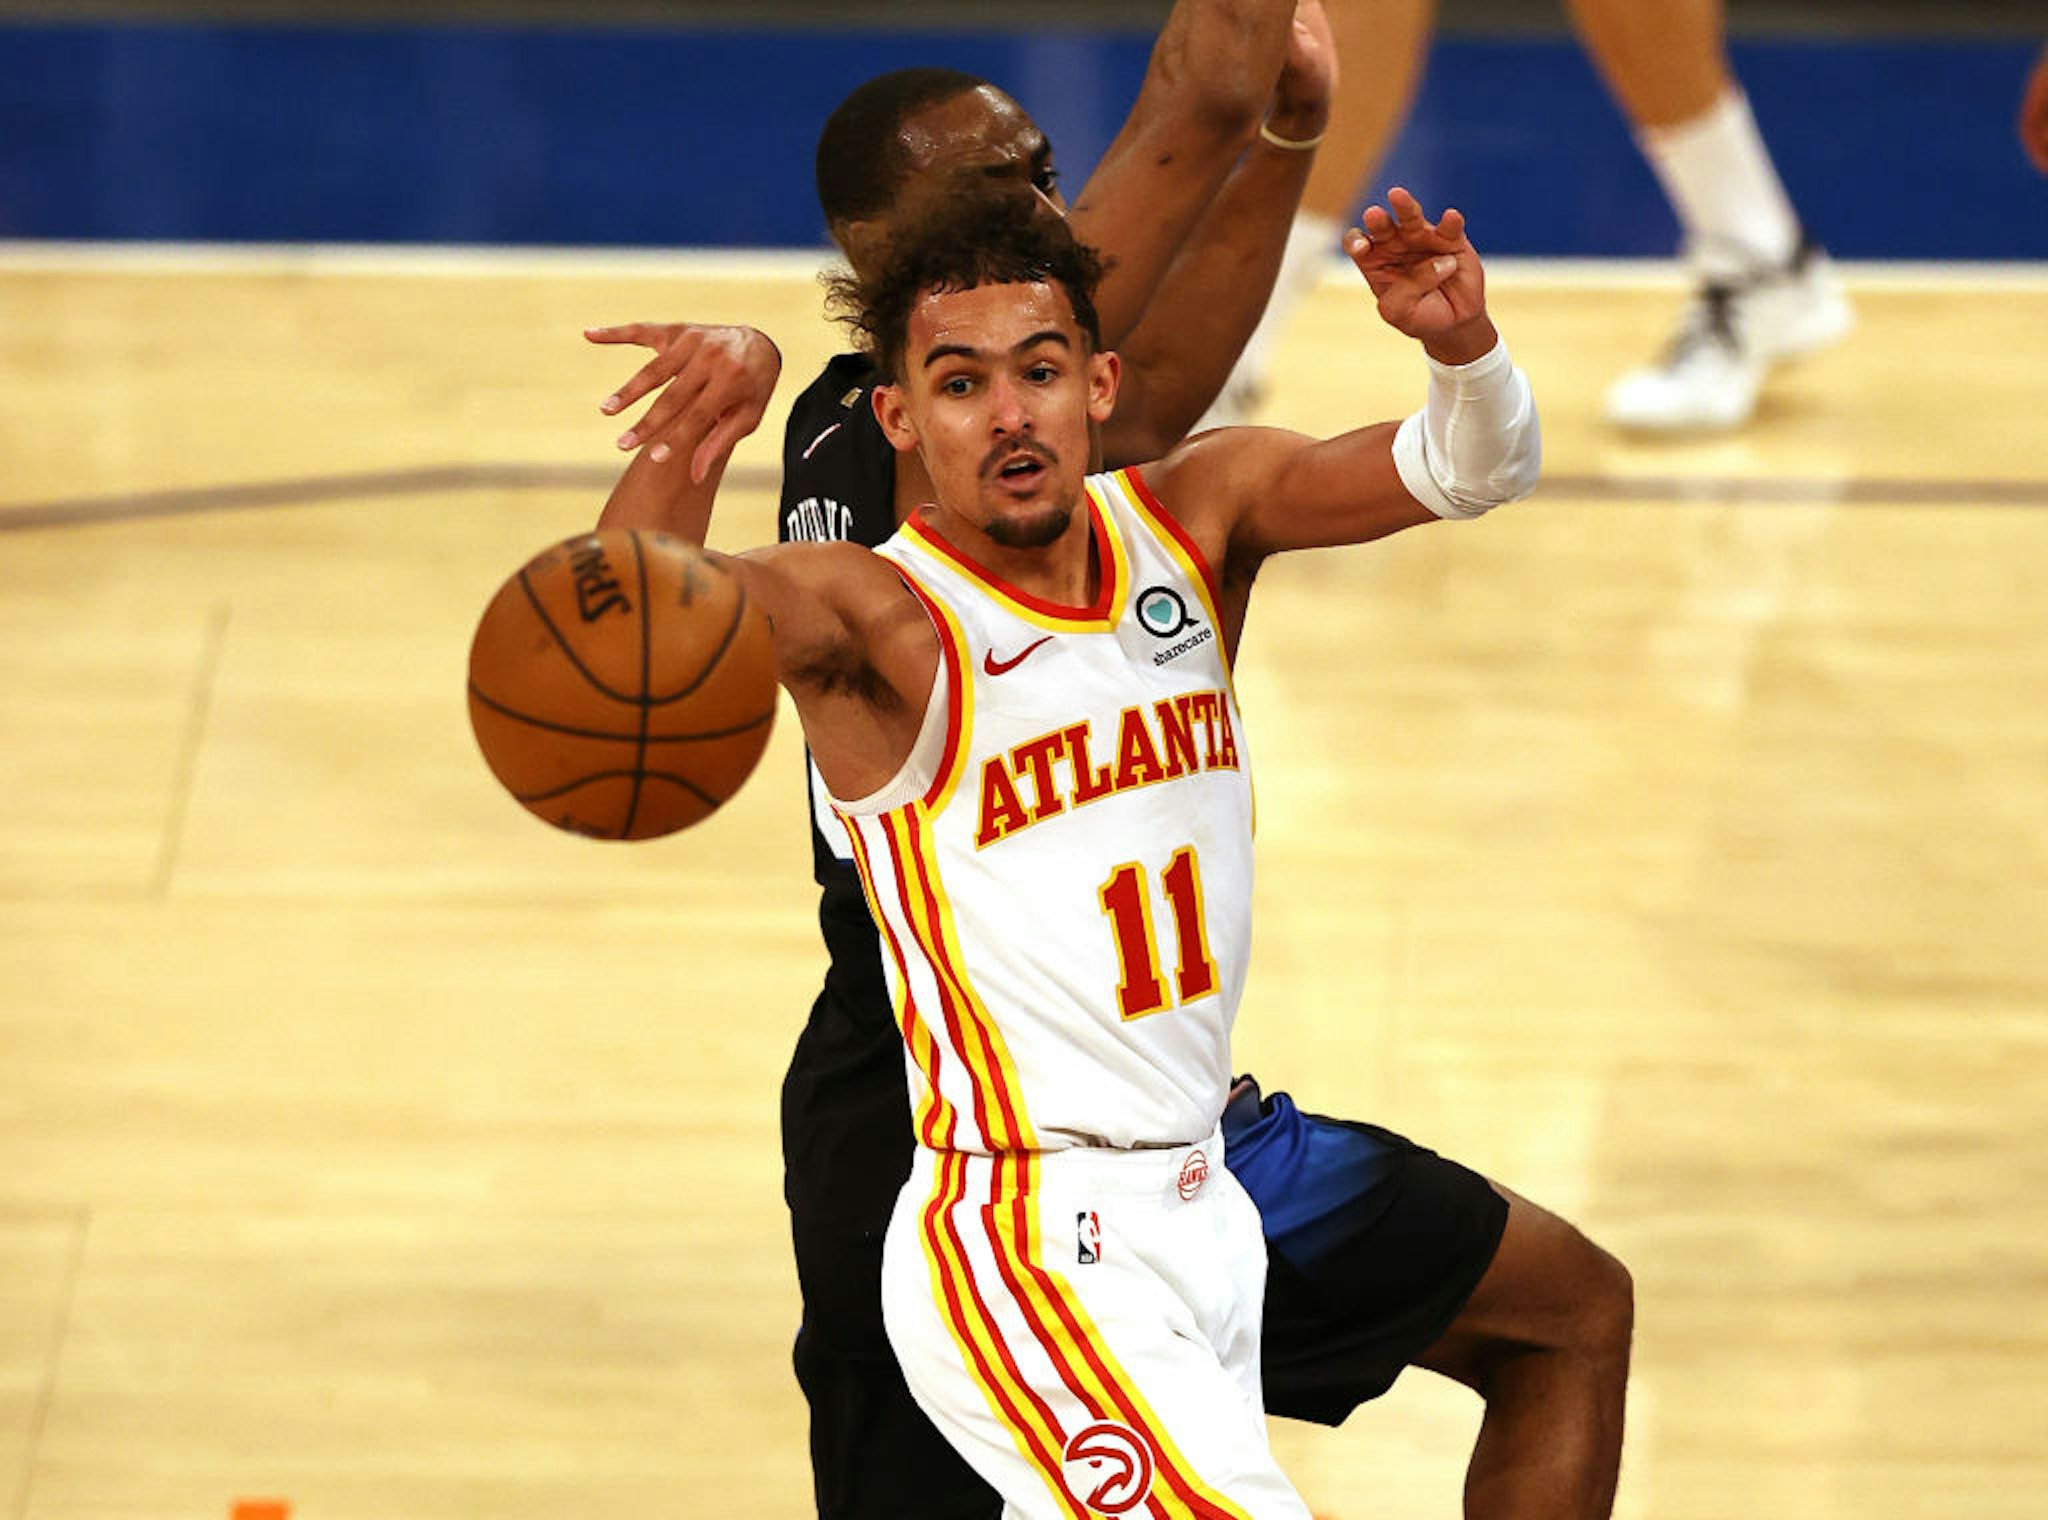 NEW YORK, NEW YORK - MAY 26: Trae Young #11 of the Atlanta Hawks passes the ball as Alec Burks #18 of the New York Knicks defends in the fourth quarter during game two of the Eastern Conference Quarterfinals at Madison Square Garden on May 26, 2021 in New York City.The New York Knicks defeated the Atlanta Hawks 101-92. NOTE TO USER: User expressly acknowledges and agrees that, by downloading and or using this photograph, User is consenting to the terms and conditions of the Getty Images License Agreement. (Photo by Elsa/Getty Images)